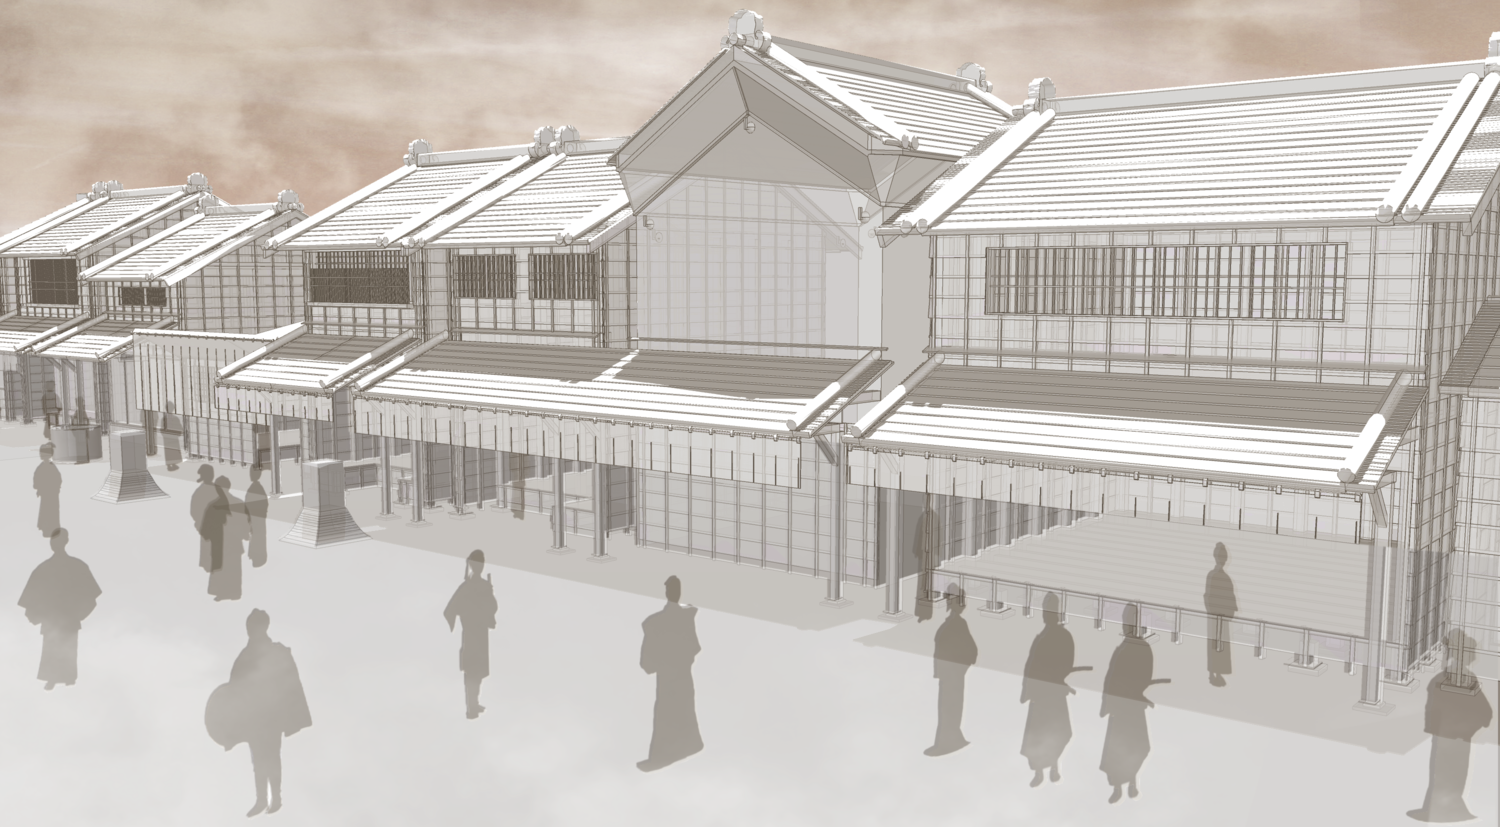 A digital reconstruction of the historical street life in Edo